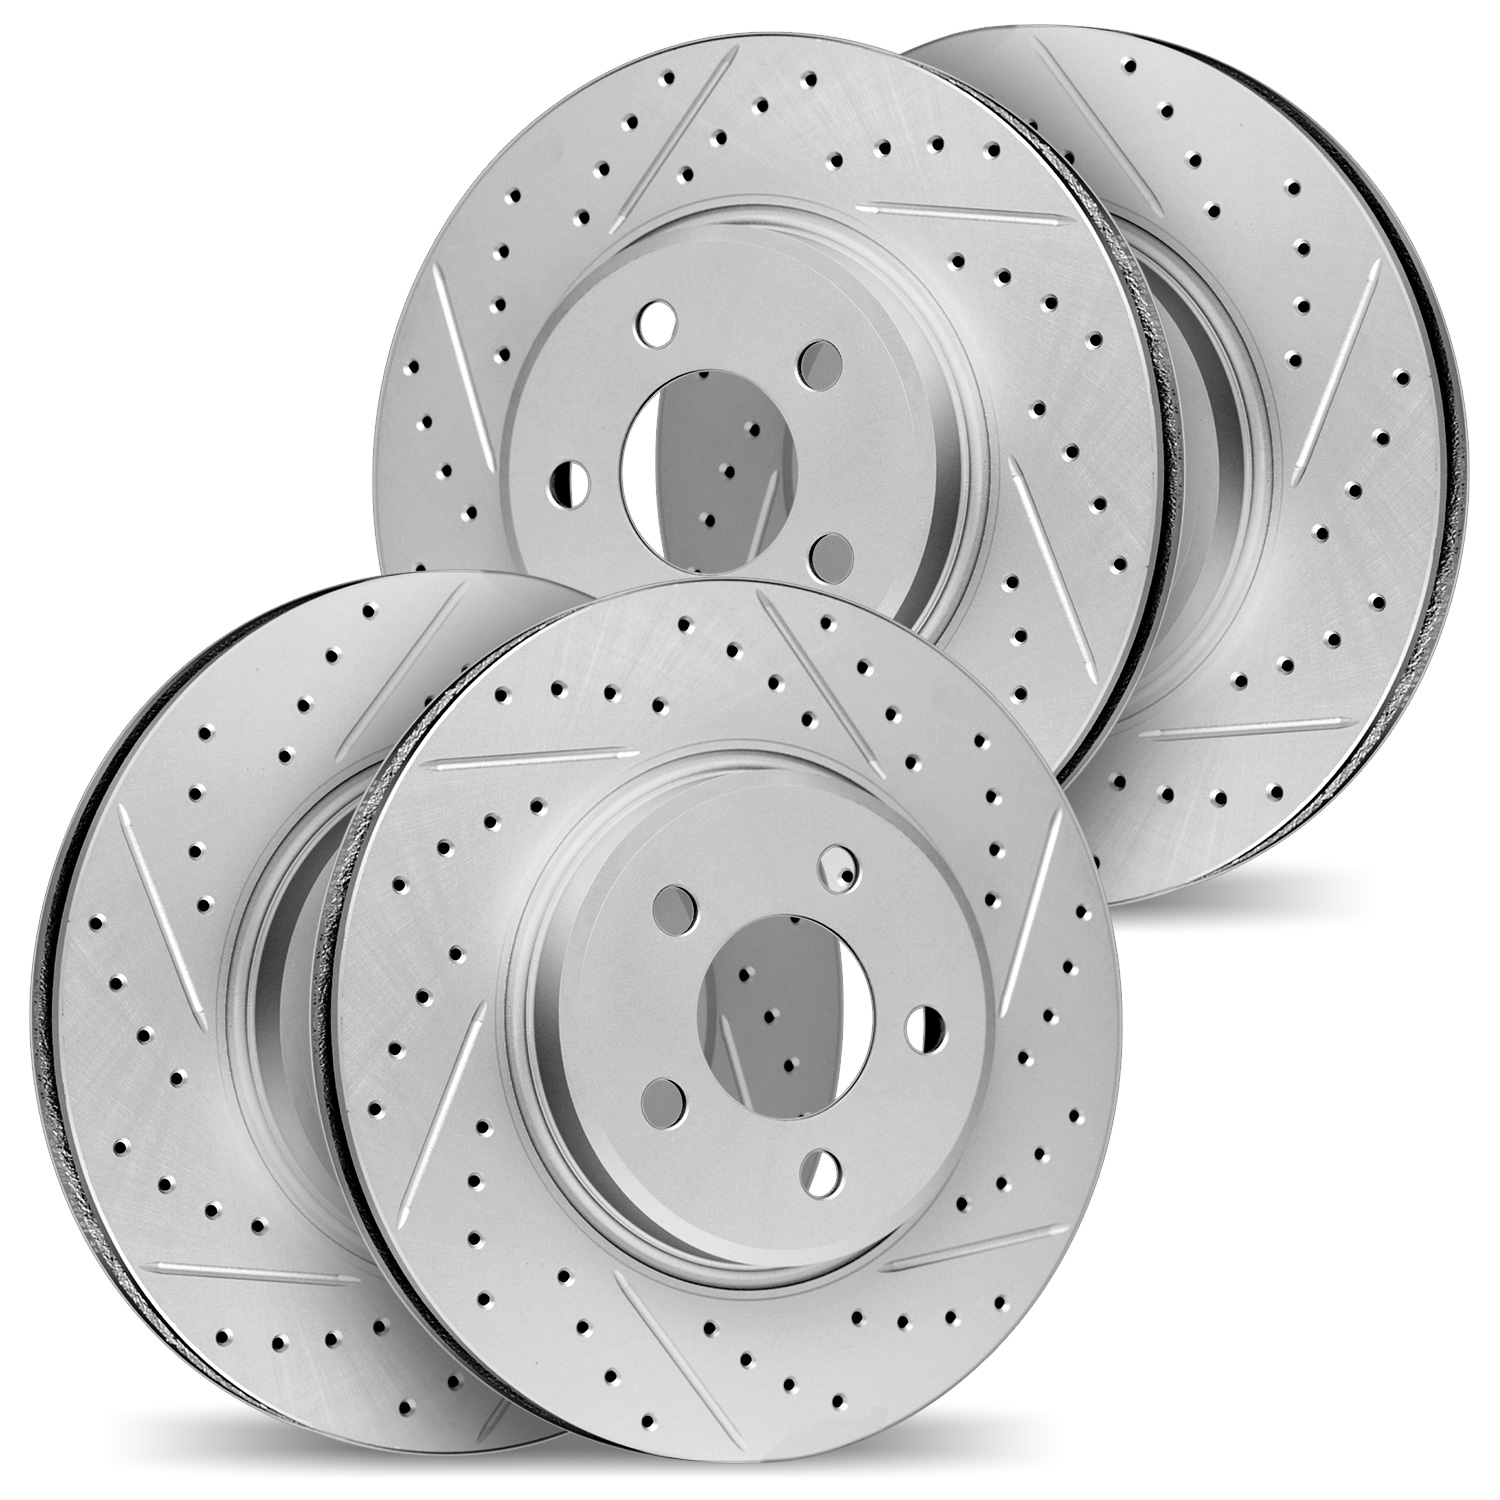 2004-63049 Geoperformance Drilled/Slotted Brake Rotors, 2006-2012 Mercedes-Benz, Position: Front and Rear